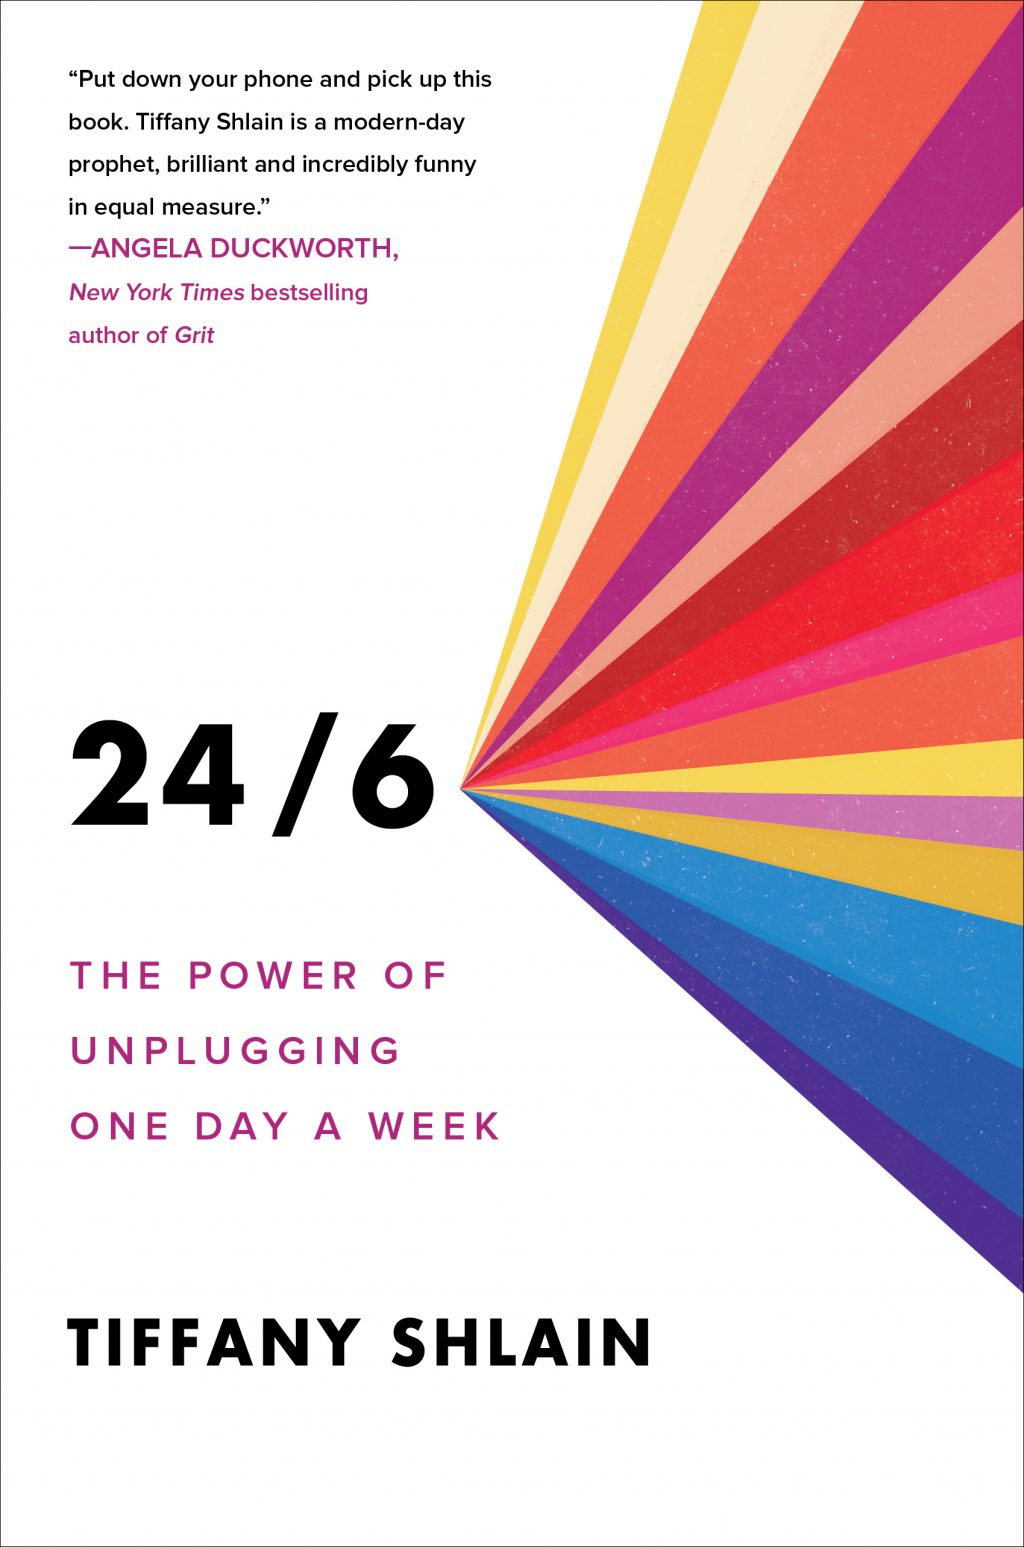 tech-talk-the-power-of-unplugging-one-day-a-week-center-for